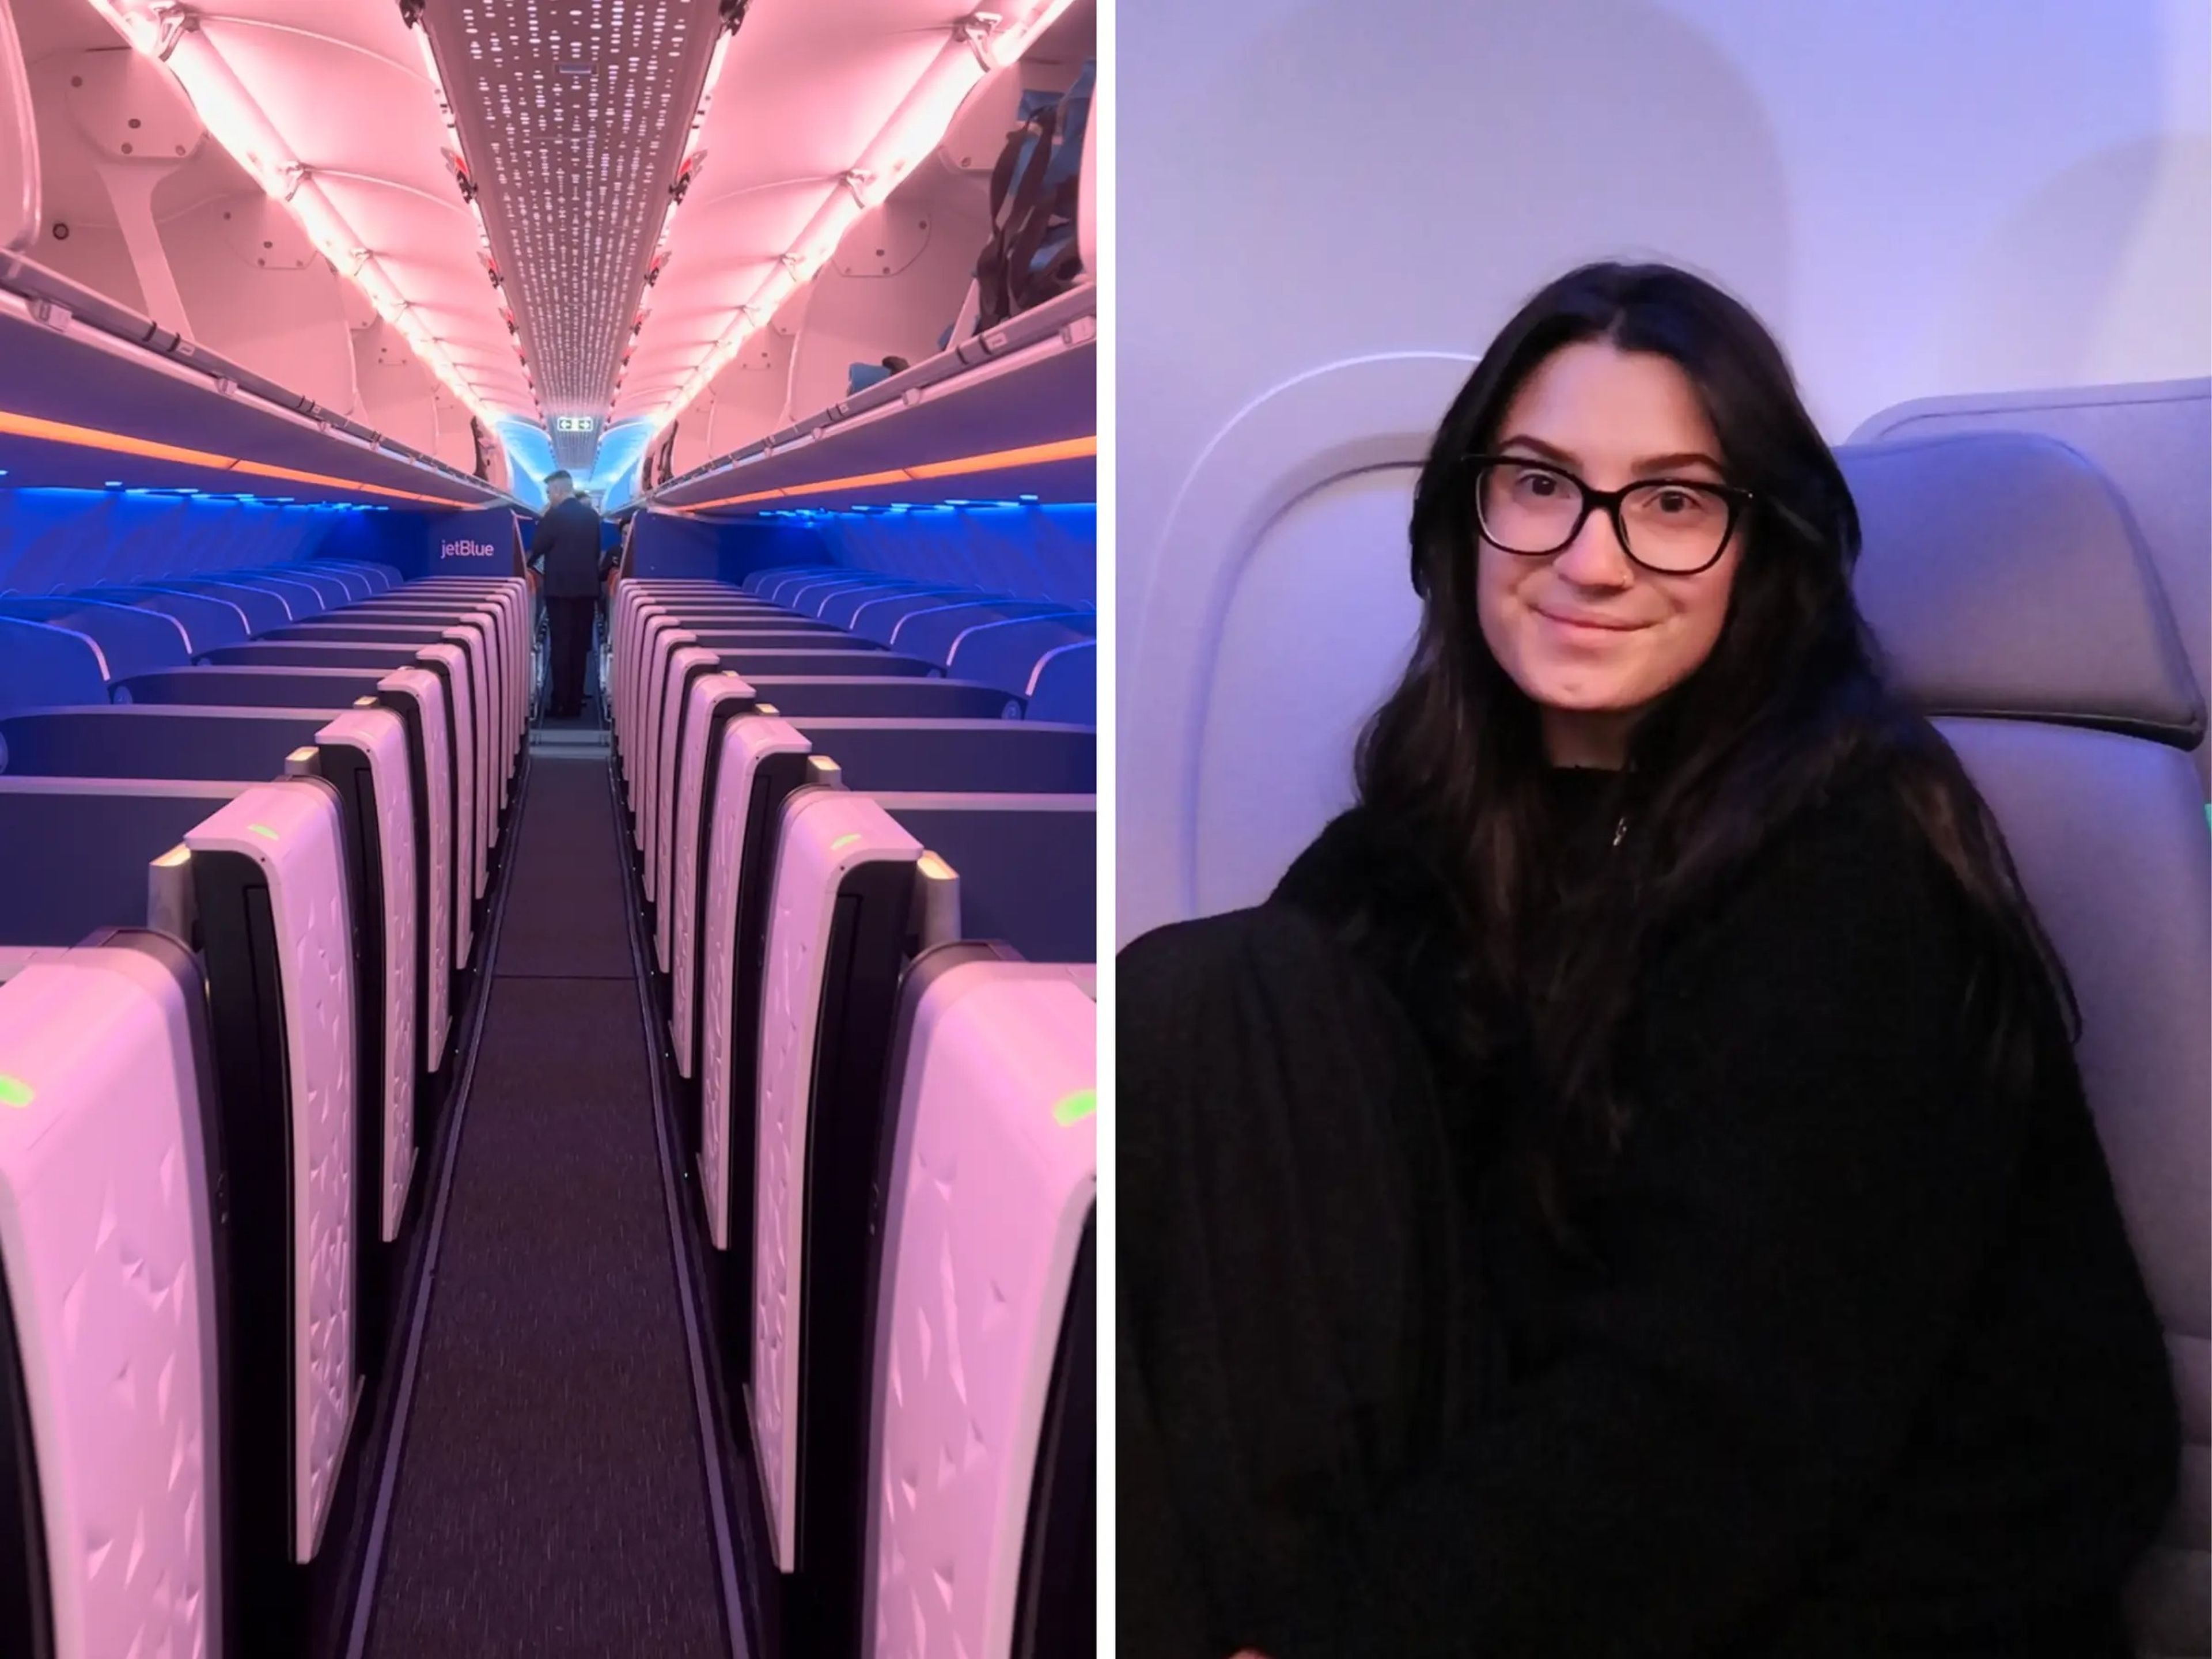 Side-by-side photos of JetBlue's Mint business class (left) and Insider's reporter in her seat (right).